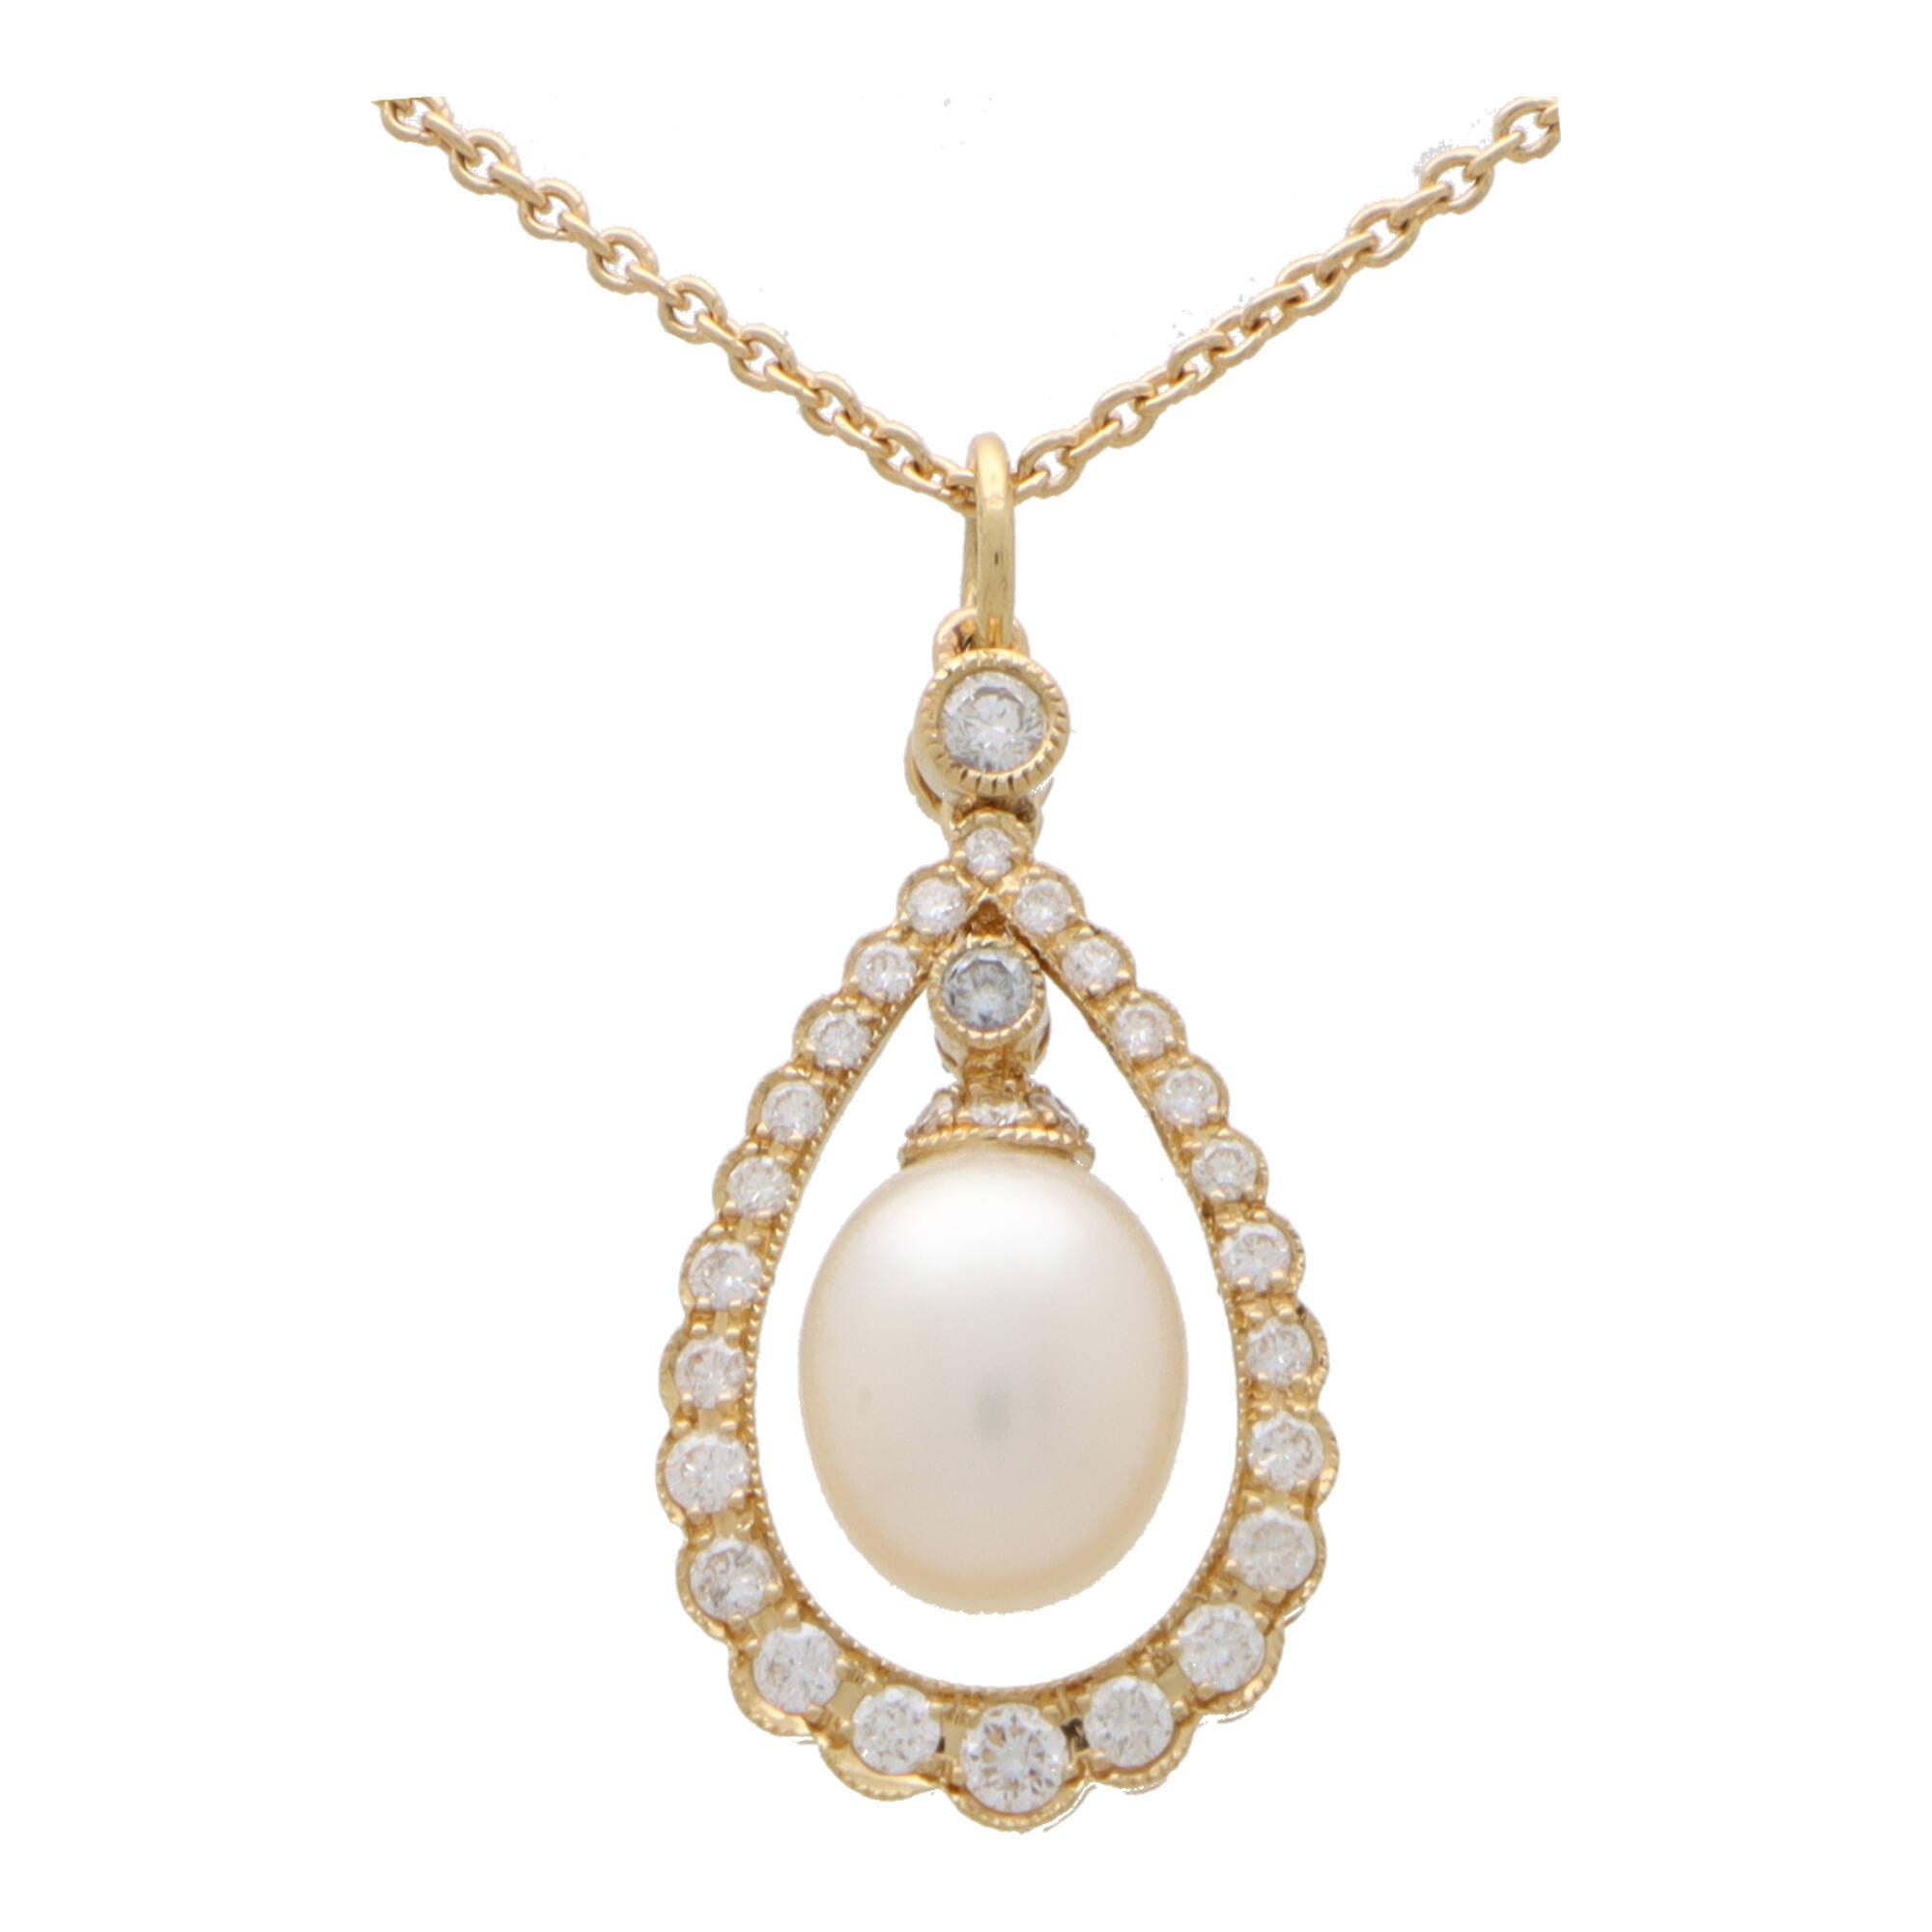  A fabulous cultured pearl and diamond garland pendant necklace set in 18k yellow gold.

The pendant prominently features a 6 x 8-millimetre pearl that elegantly hangs within a circular diamond set garland motif. To the top of the pearl is a single